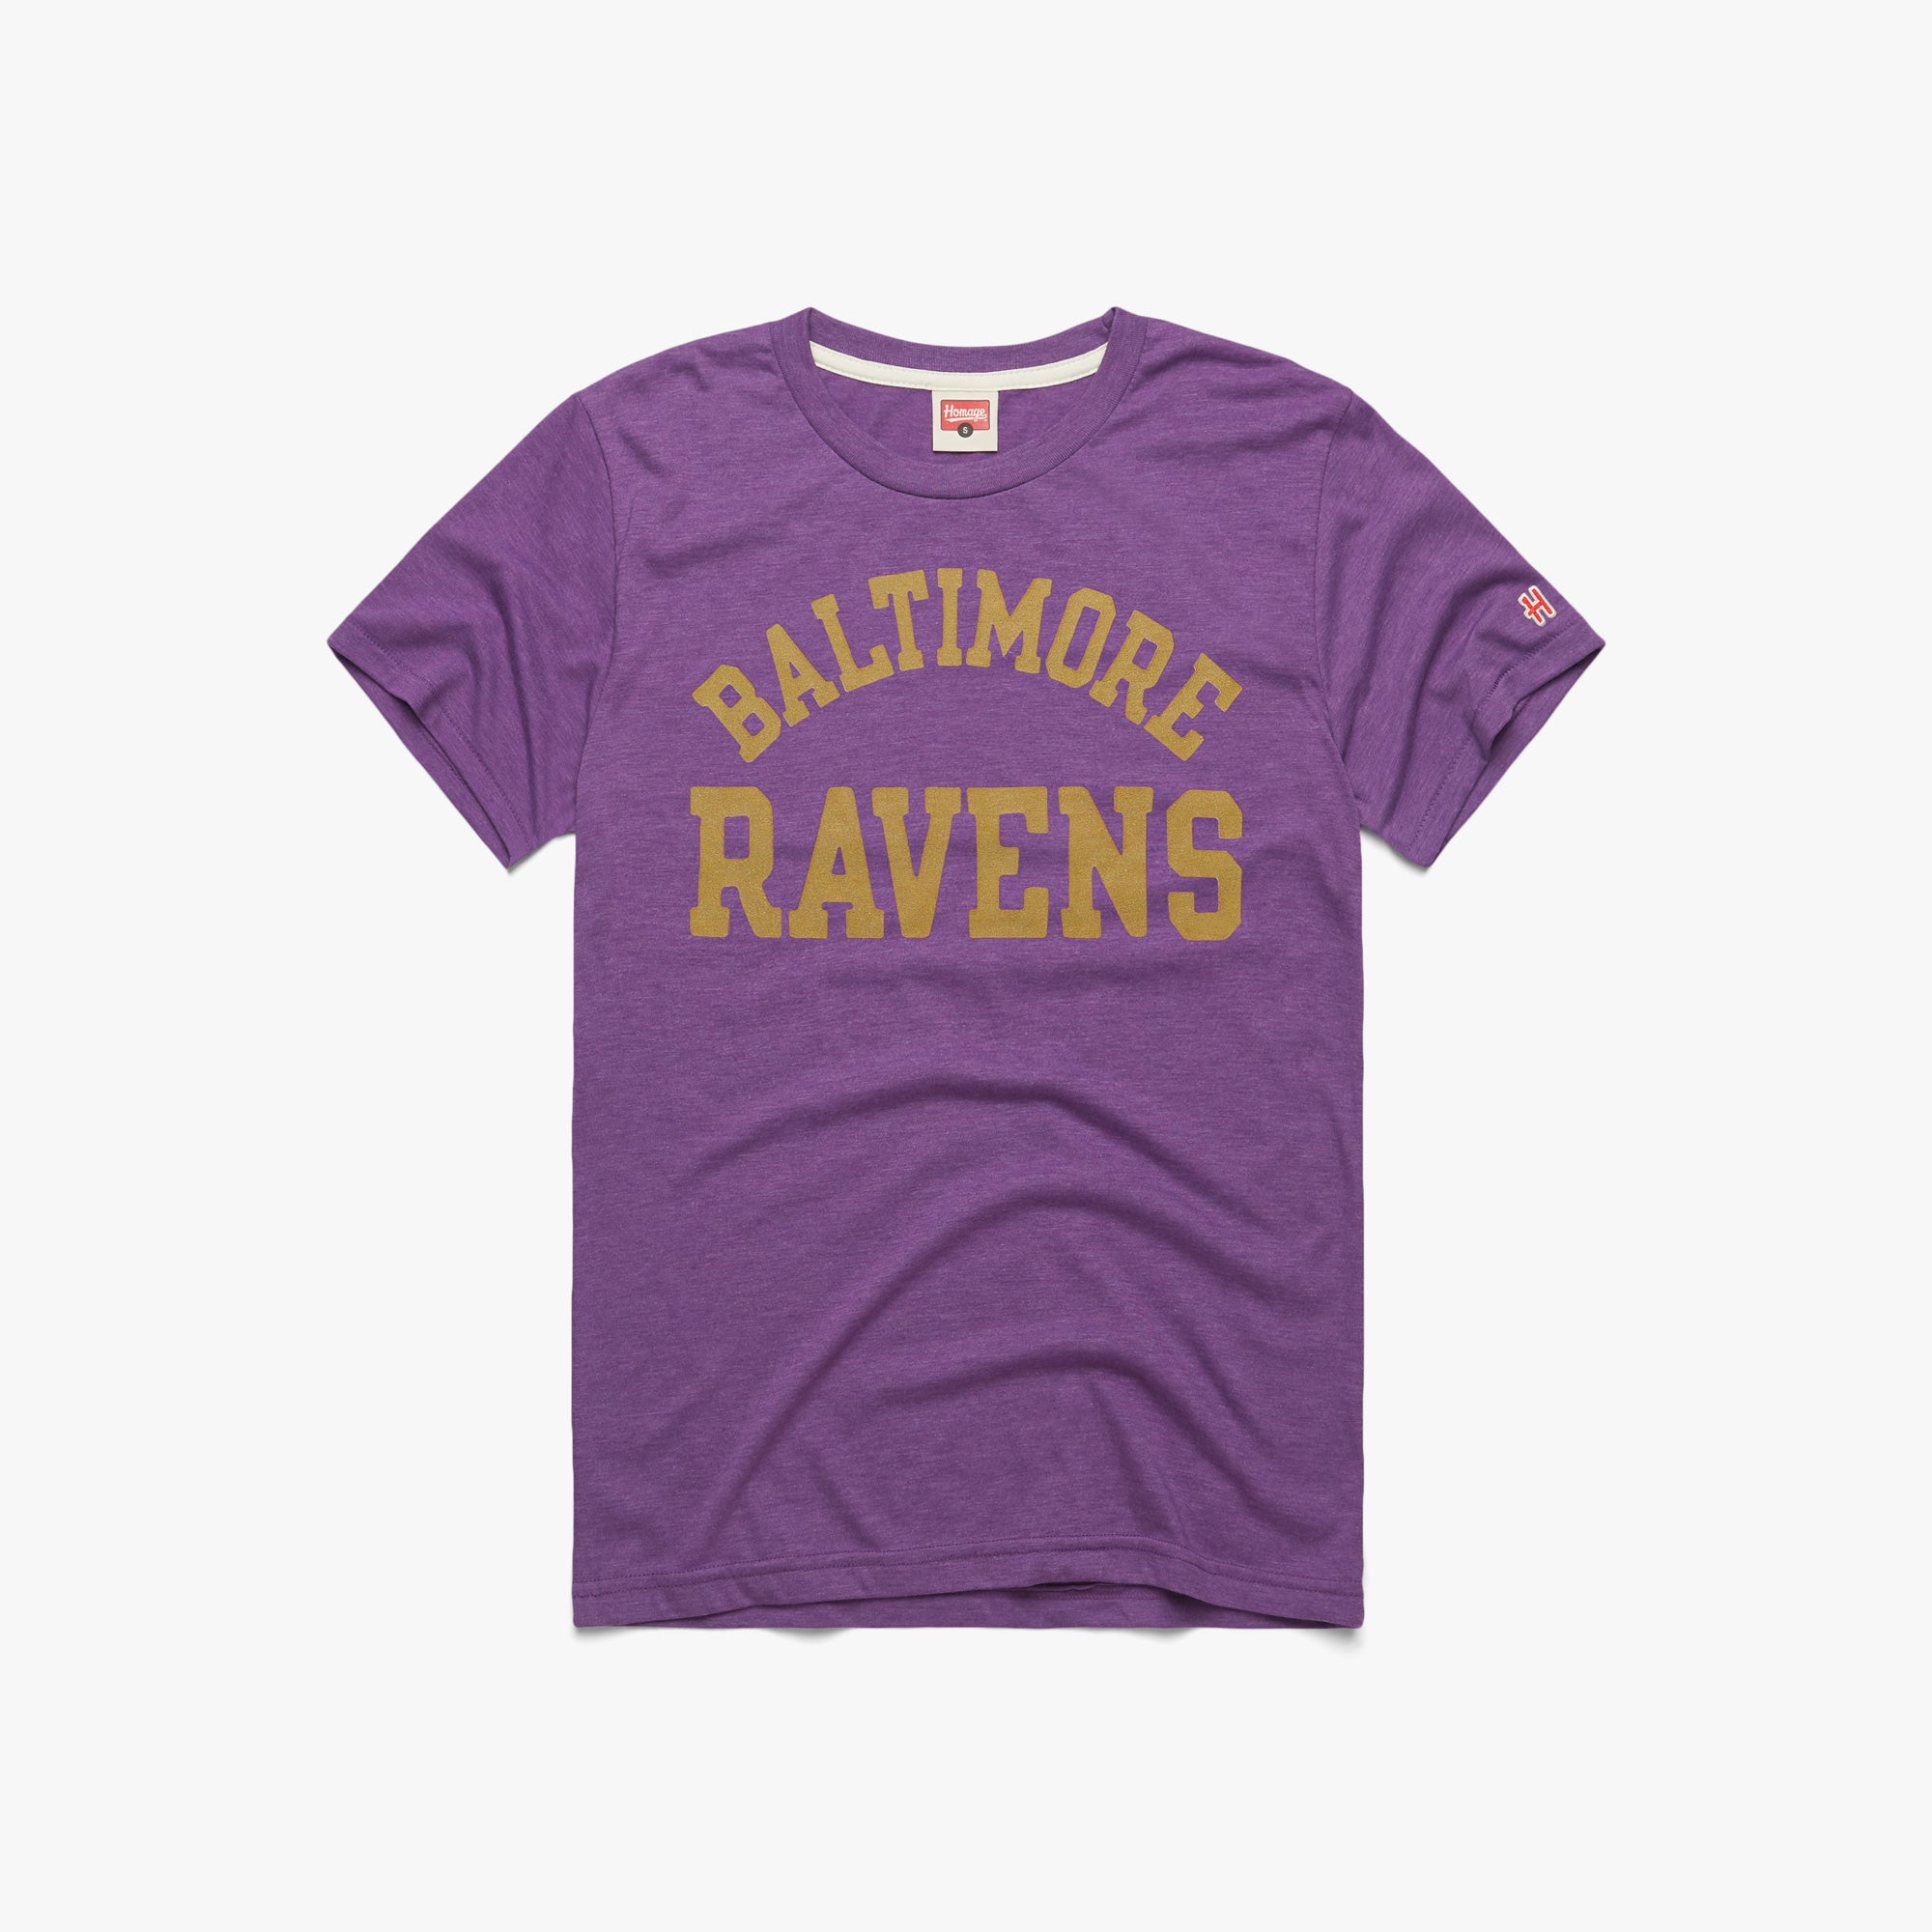 Baltimore Ravens Classic T-Shirt from Homage. | Officially Licensed Vintage NFL Apparel from Homage Pro Shop.